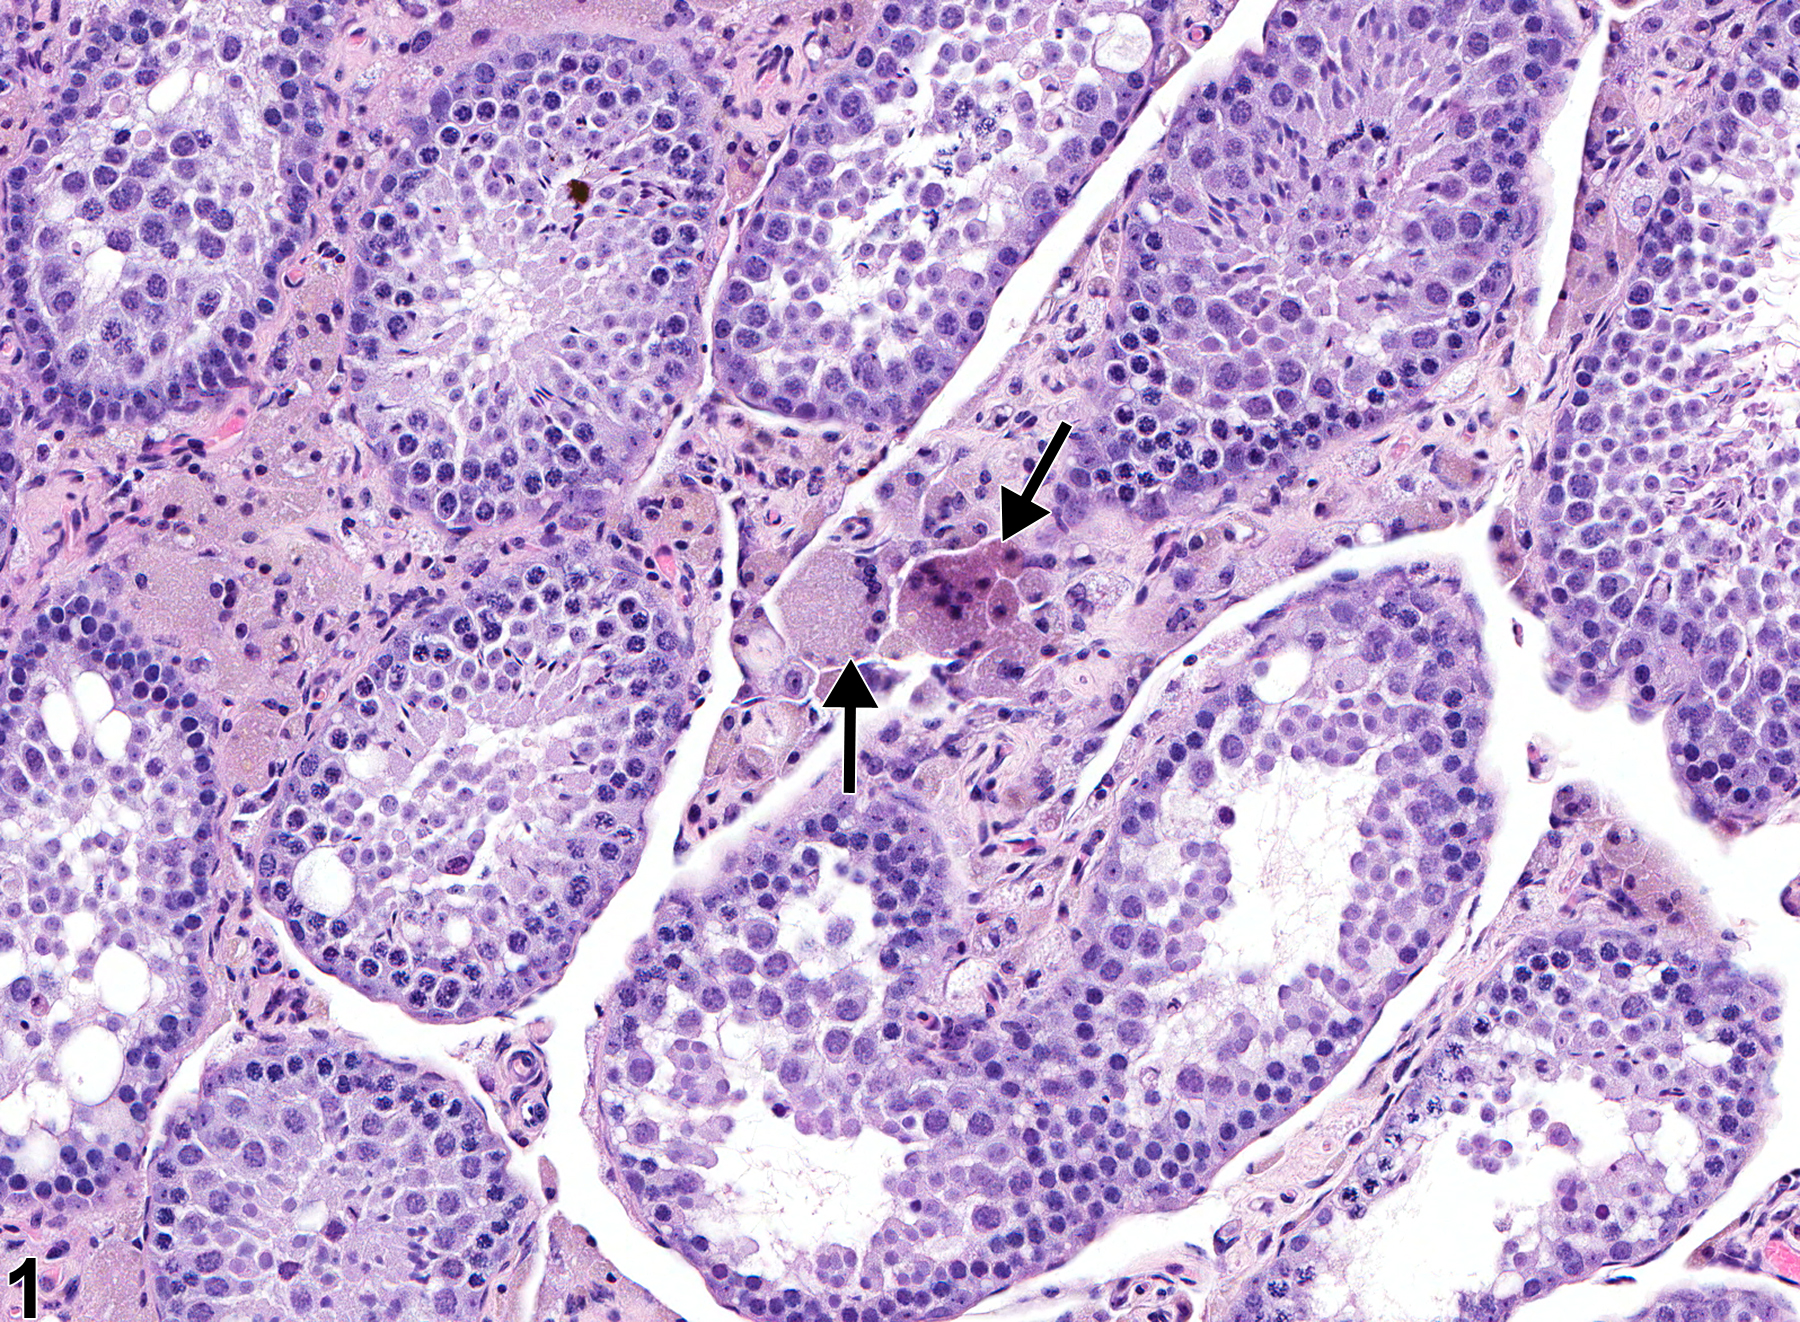 Image of interstitial cell syncytial cells in the testis from a male FVB/N mouse in a chronic study